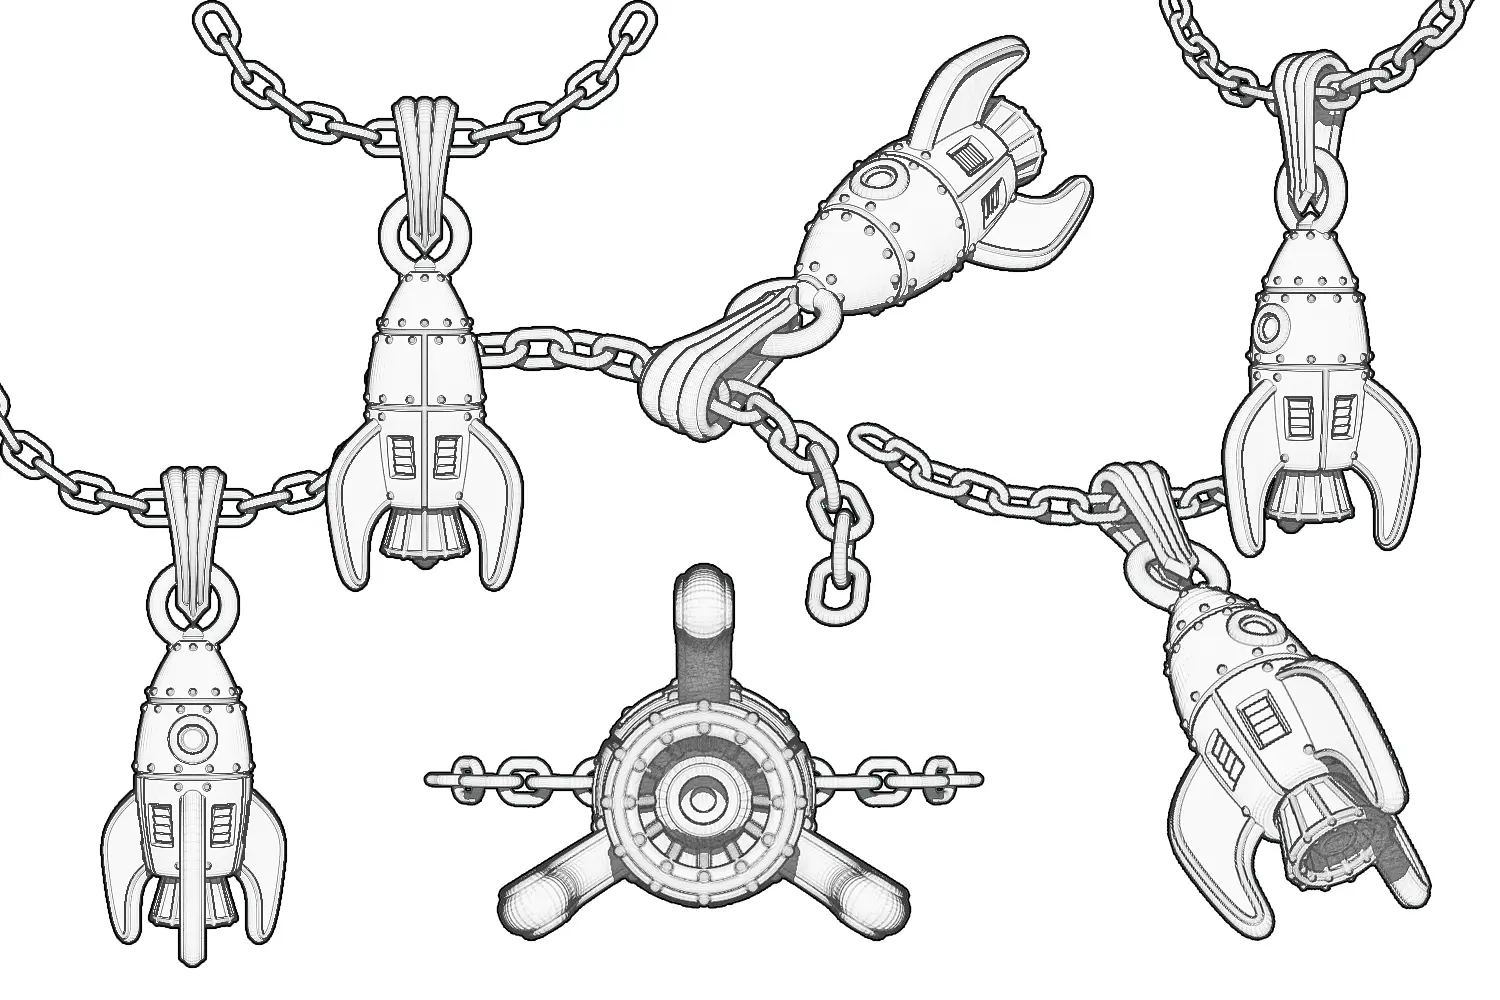 Rocket pendant sketches from different viewpoints